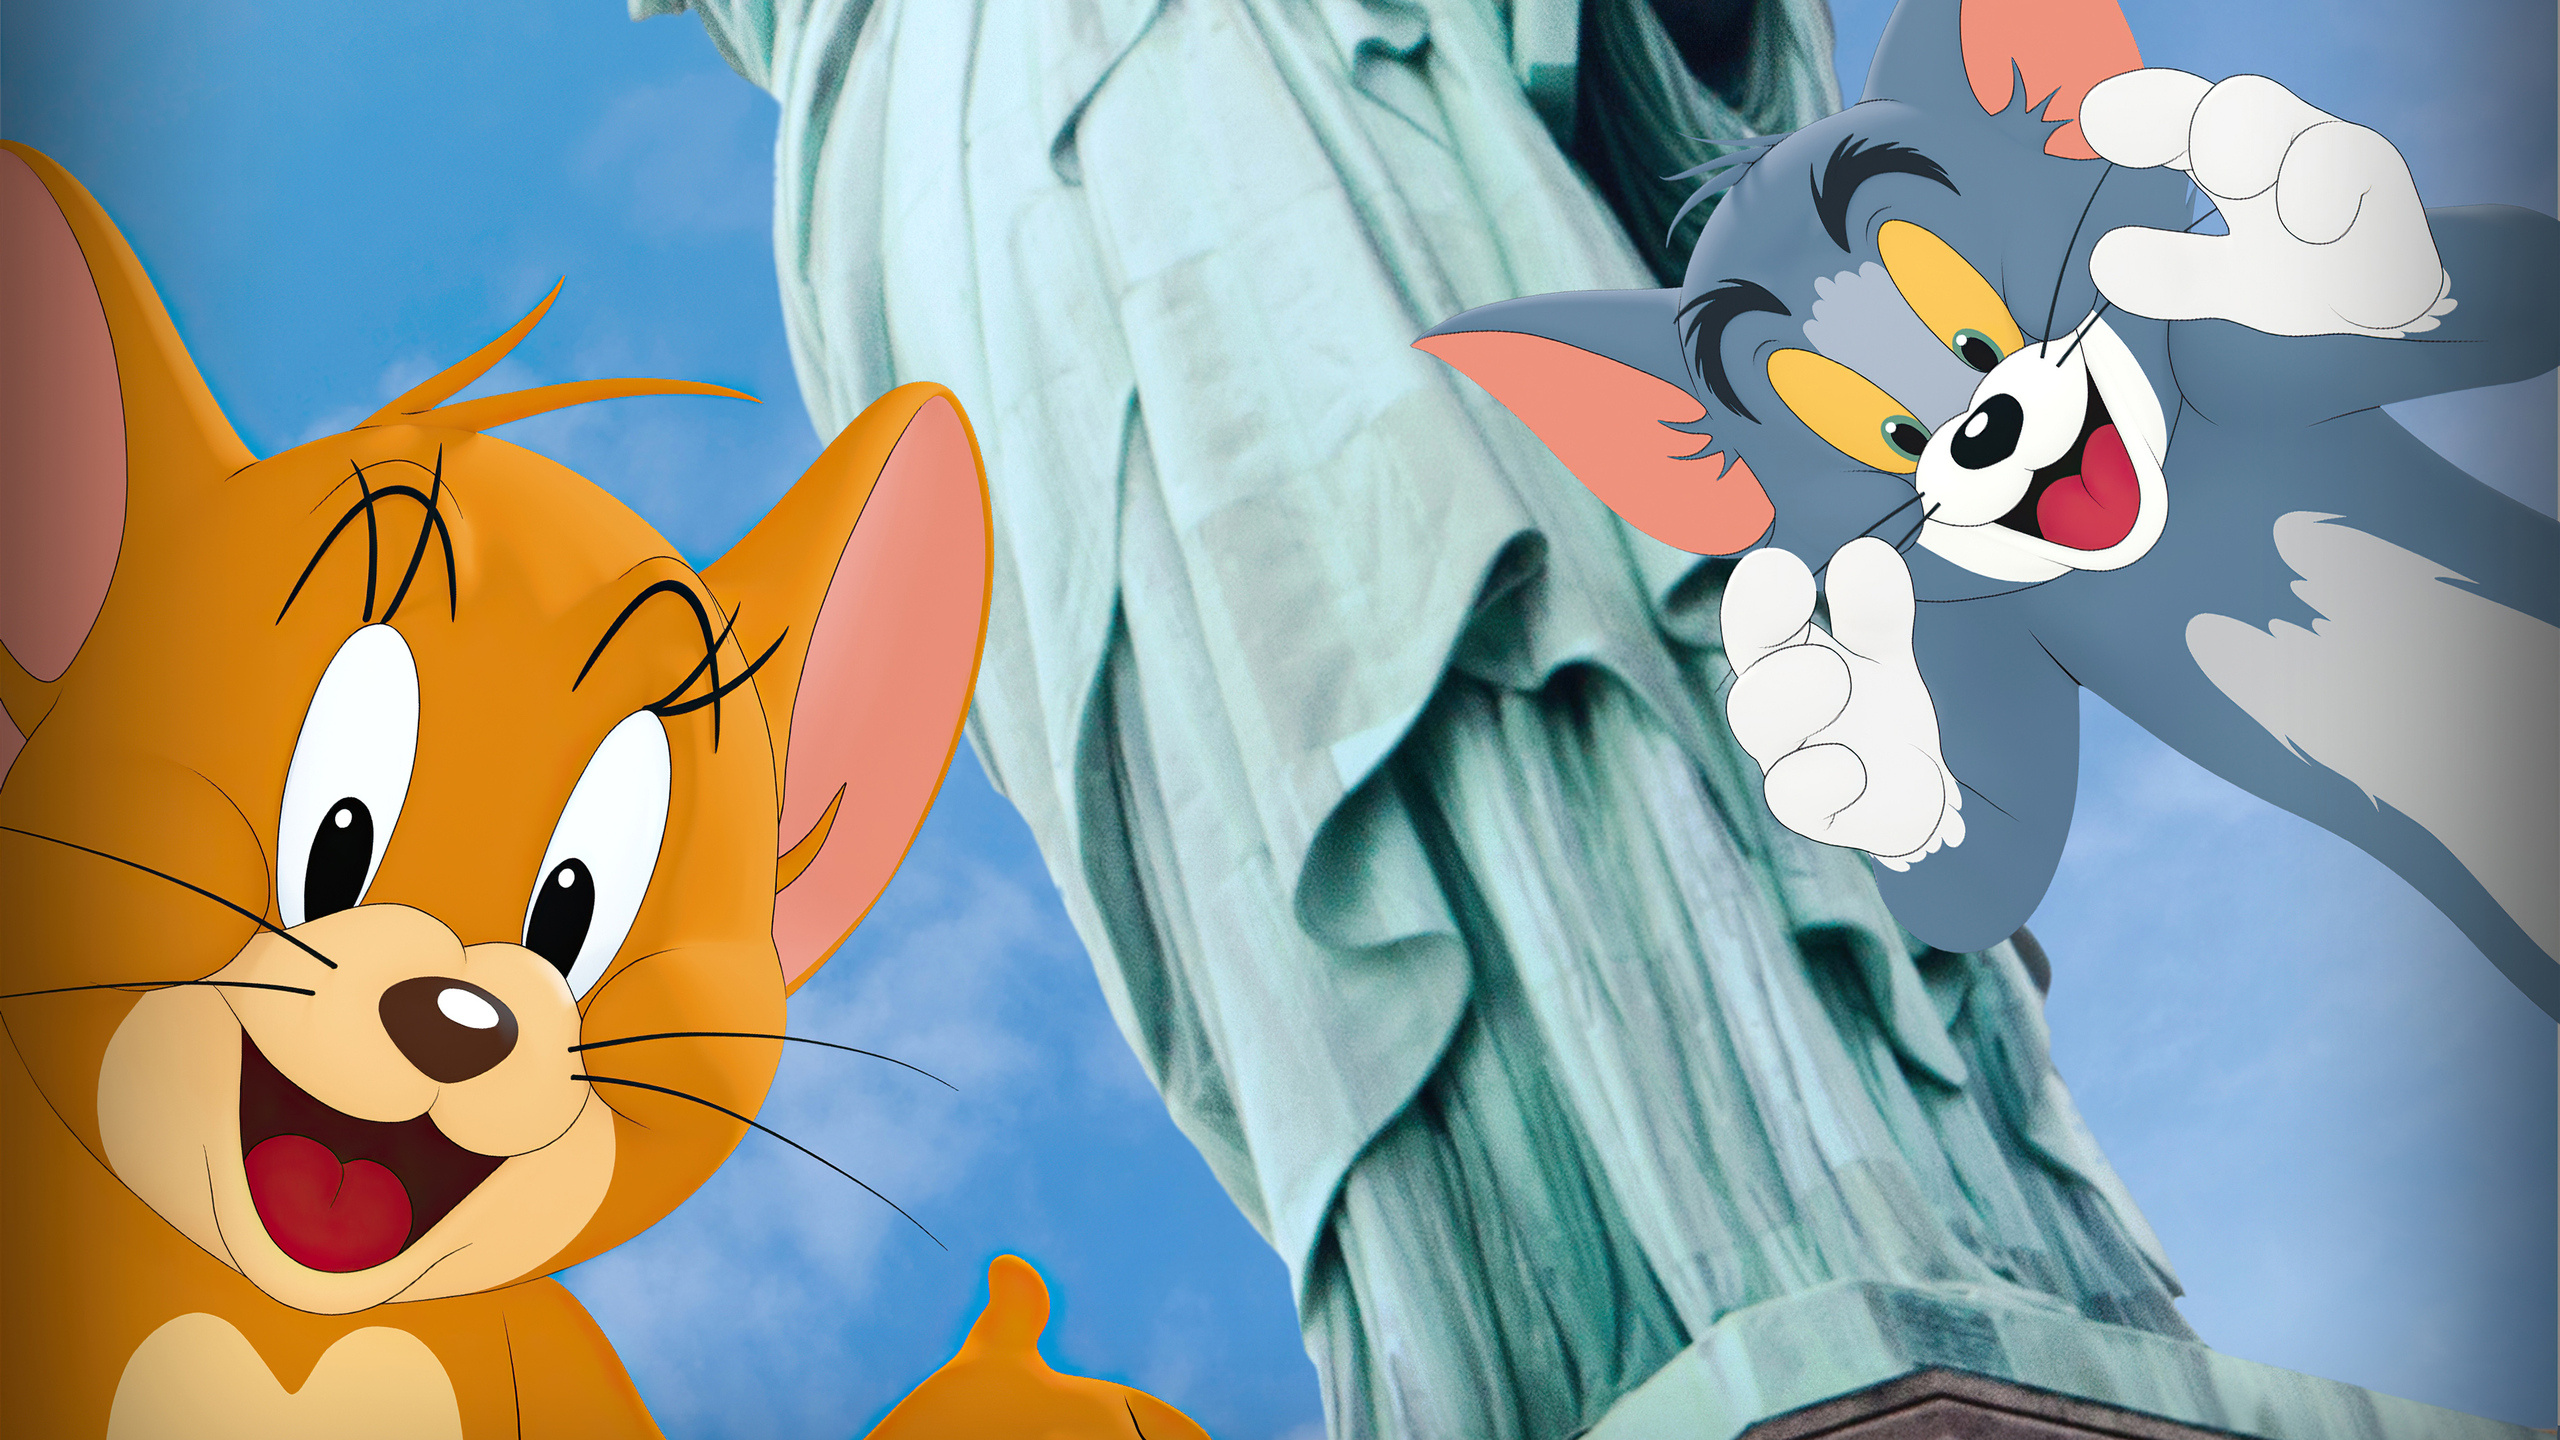 Tom and Jerry 2021, High resolution, Stunning visuals, Incredible detail, 2560x1440 HD Desktop